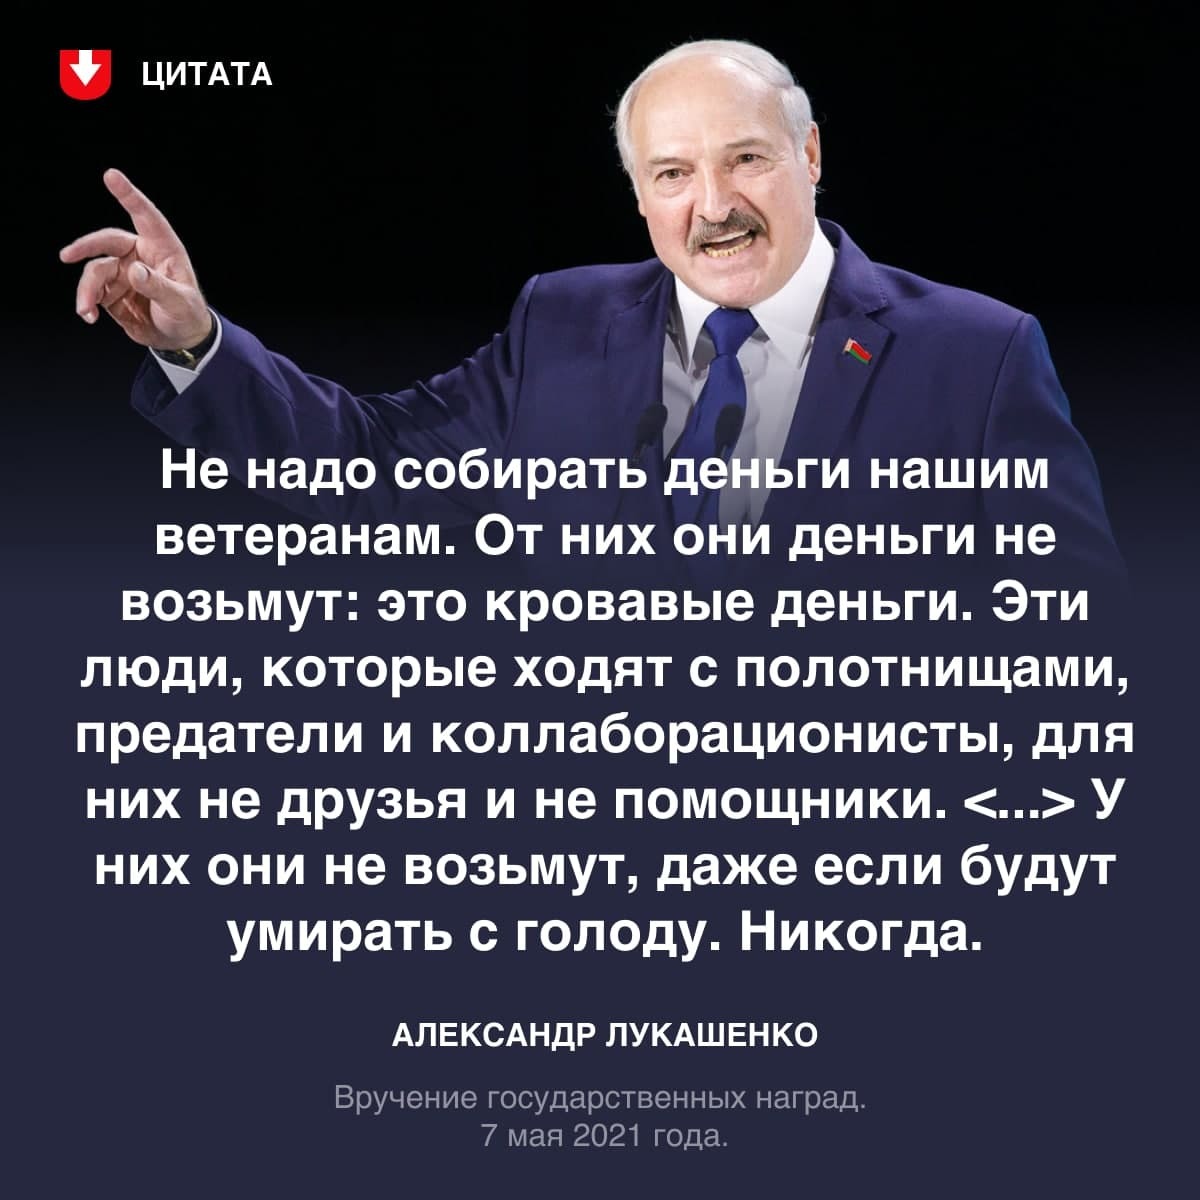 Alexander Lukashenko commented on the launch of an urgent collection for payments to veterans by the BYSOL initiative - Republic of Belarus, Politics, Protests in Belarus, Negative